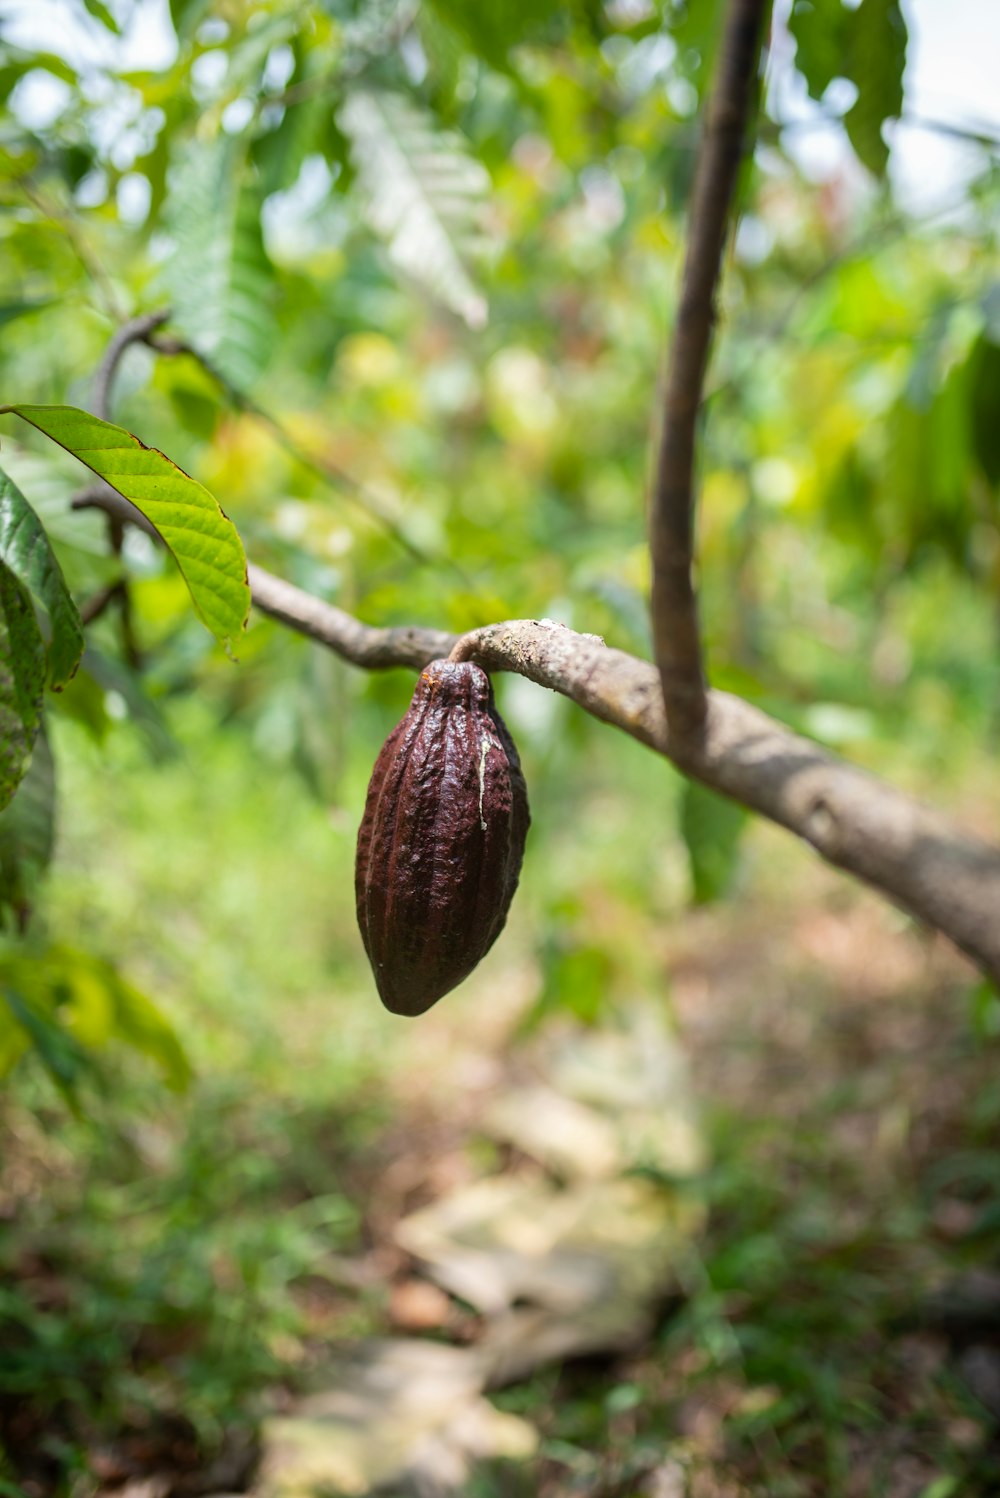 a cocoa plant hanging from a tree branch